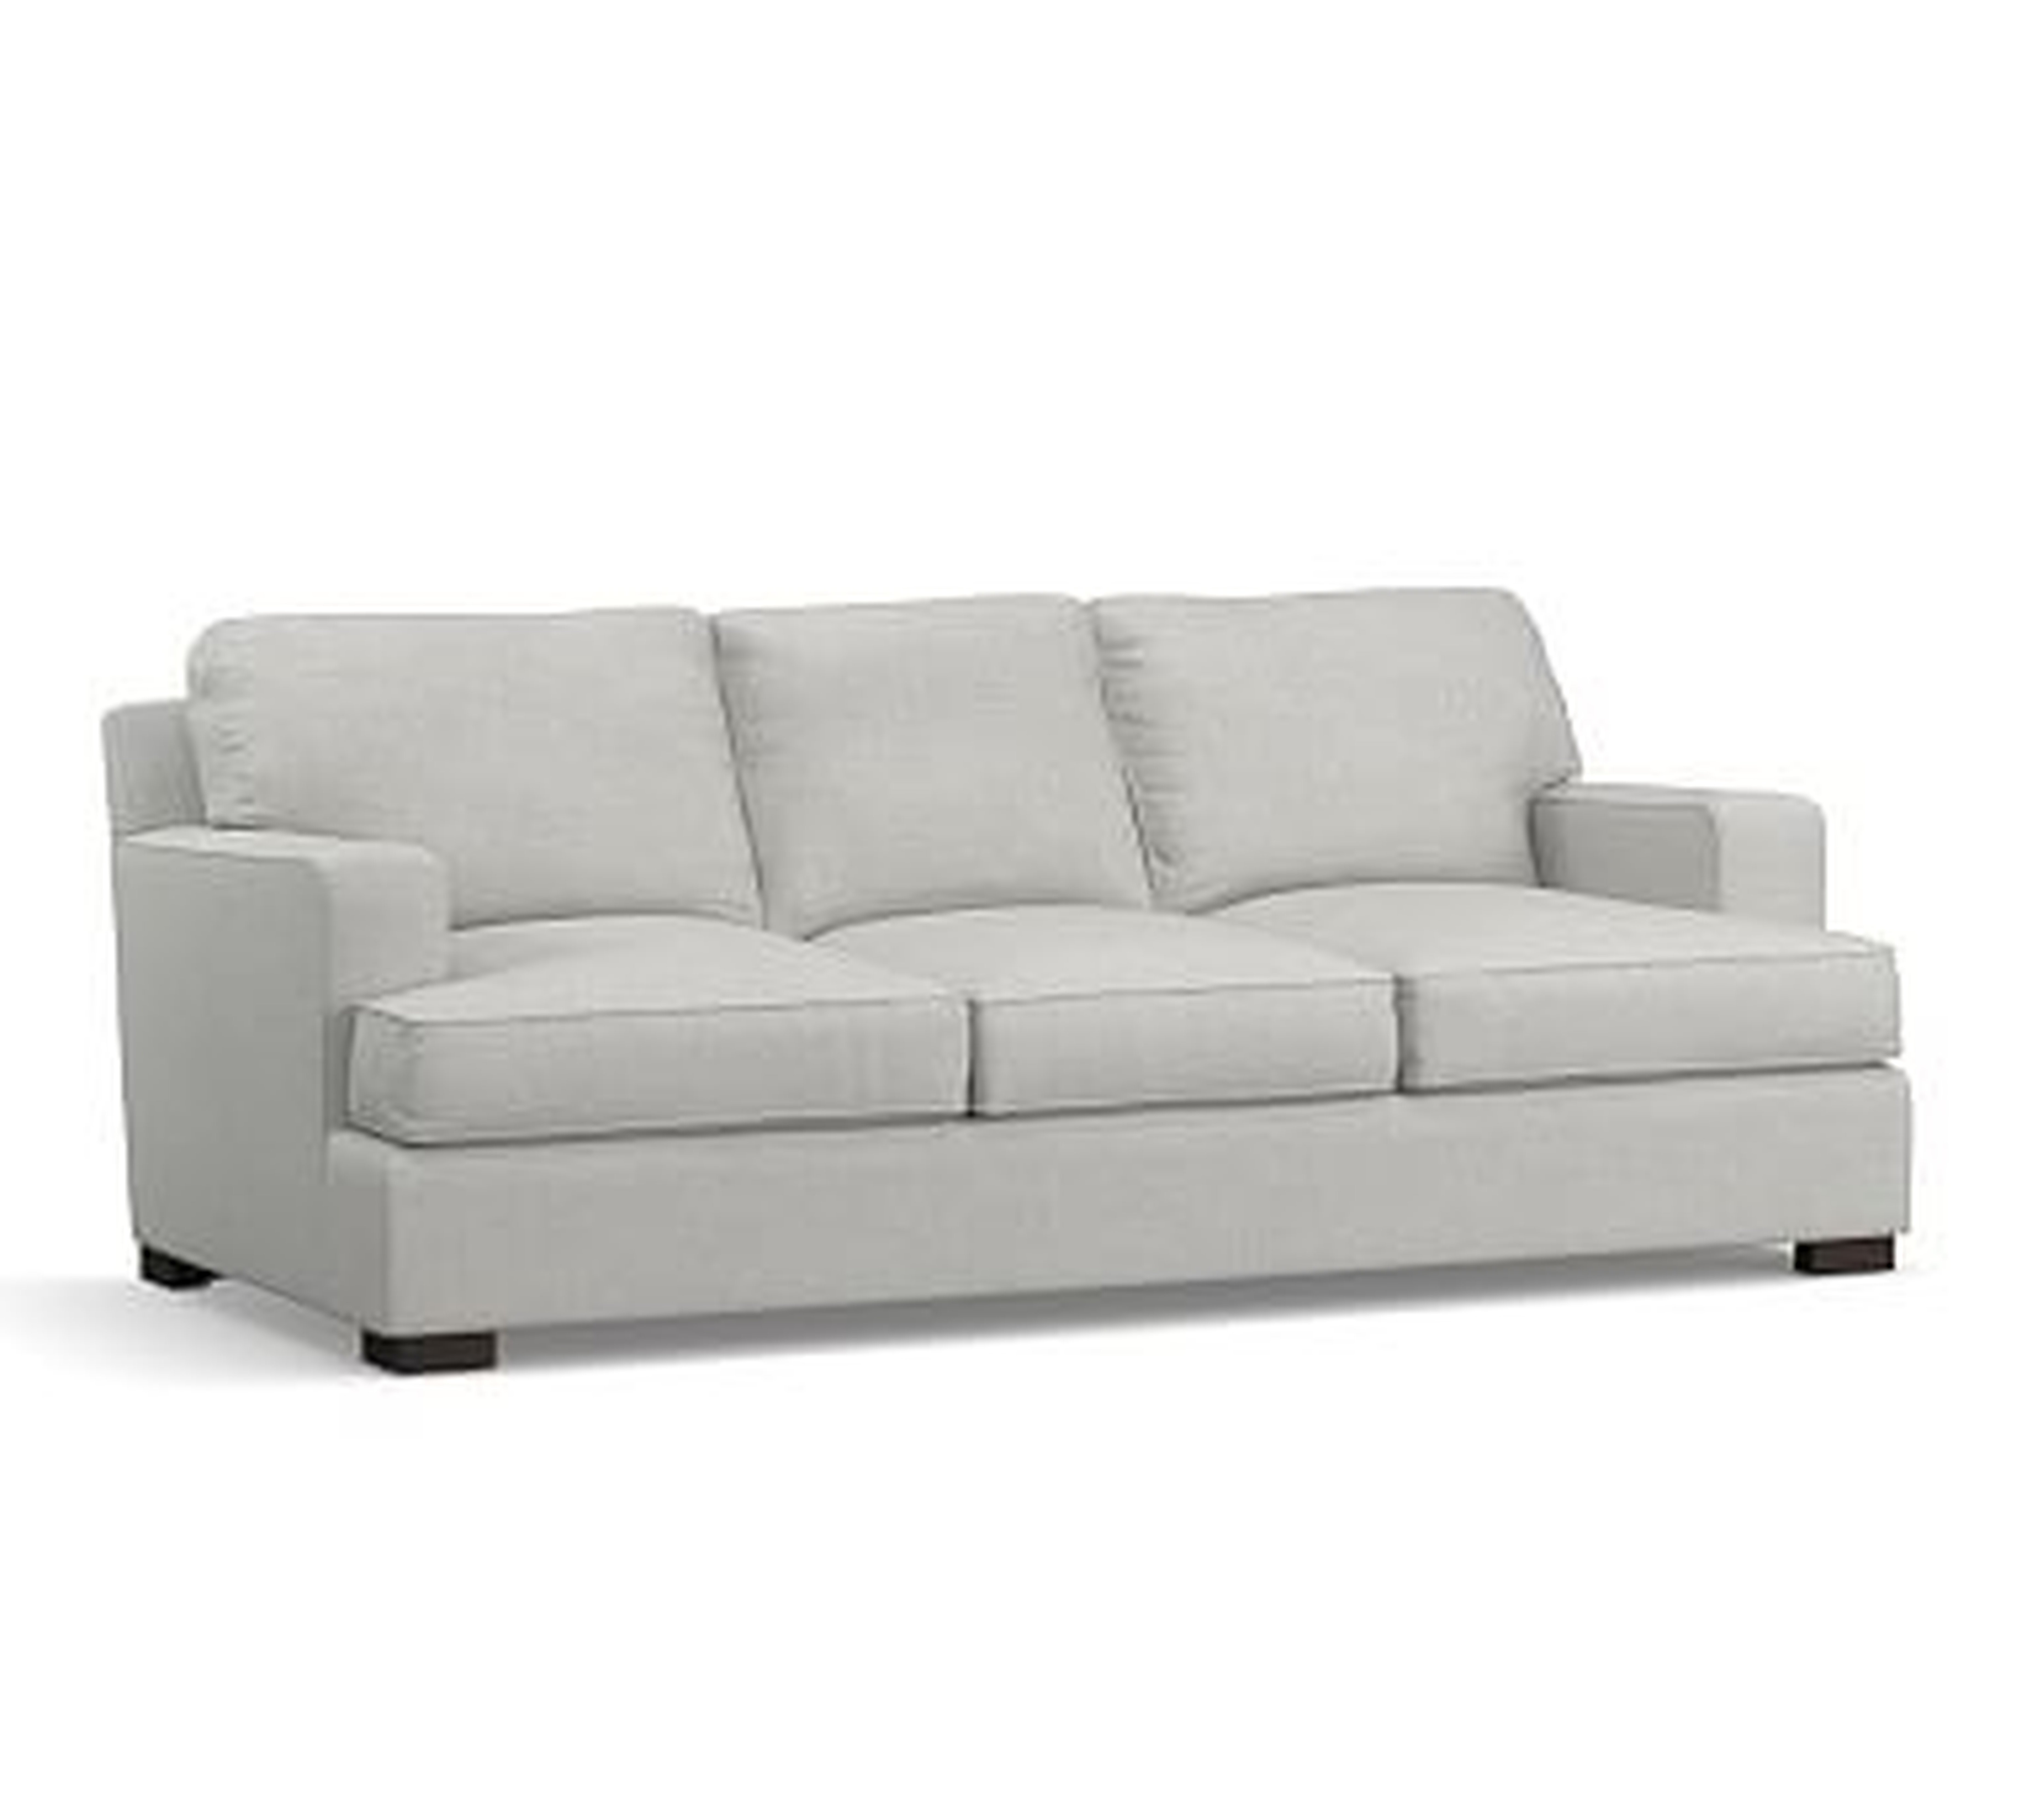 Townsend Square Arm Upholstered Sofa 86.5", Polyester Wrapped Cushions, Basketweave Slub Ash - Pottery Barn